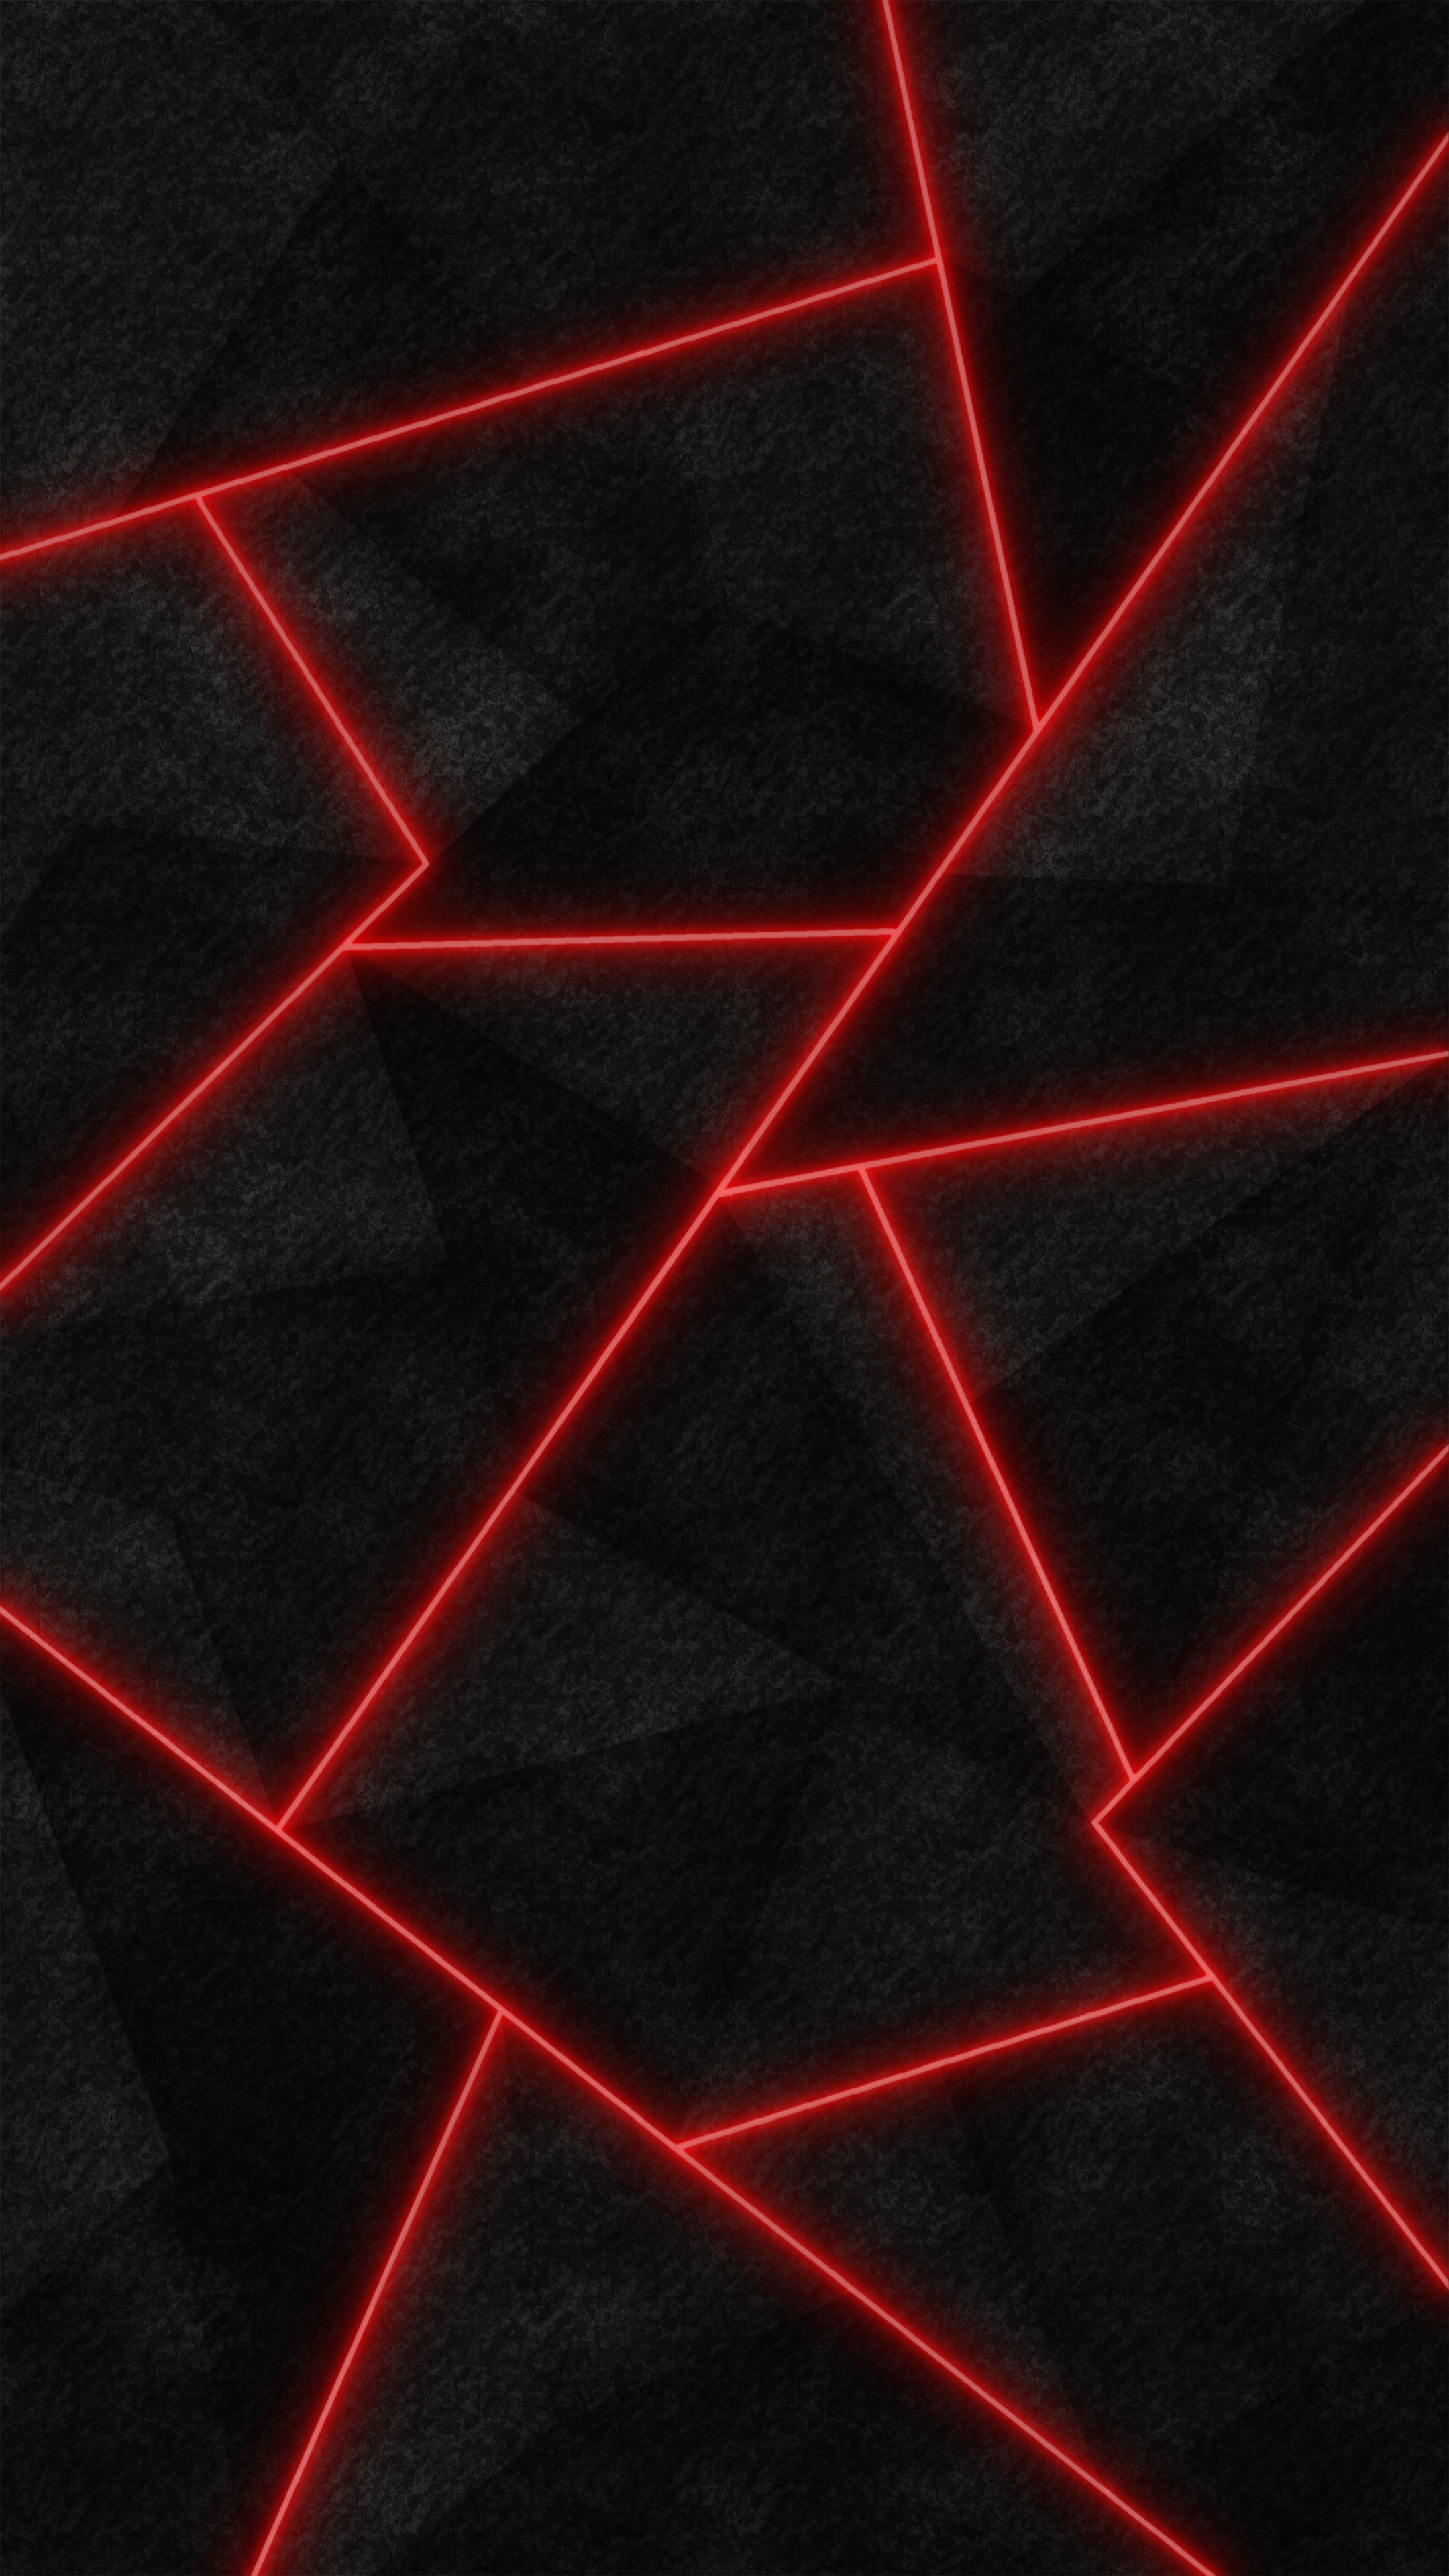 Black And Red Shards Wallpaper